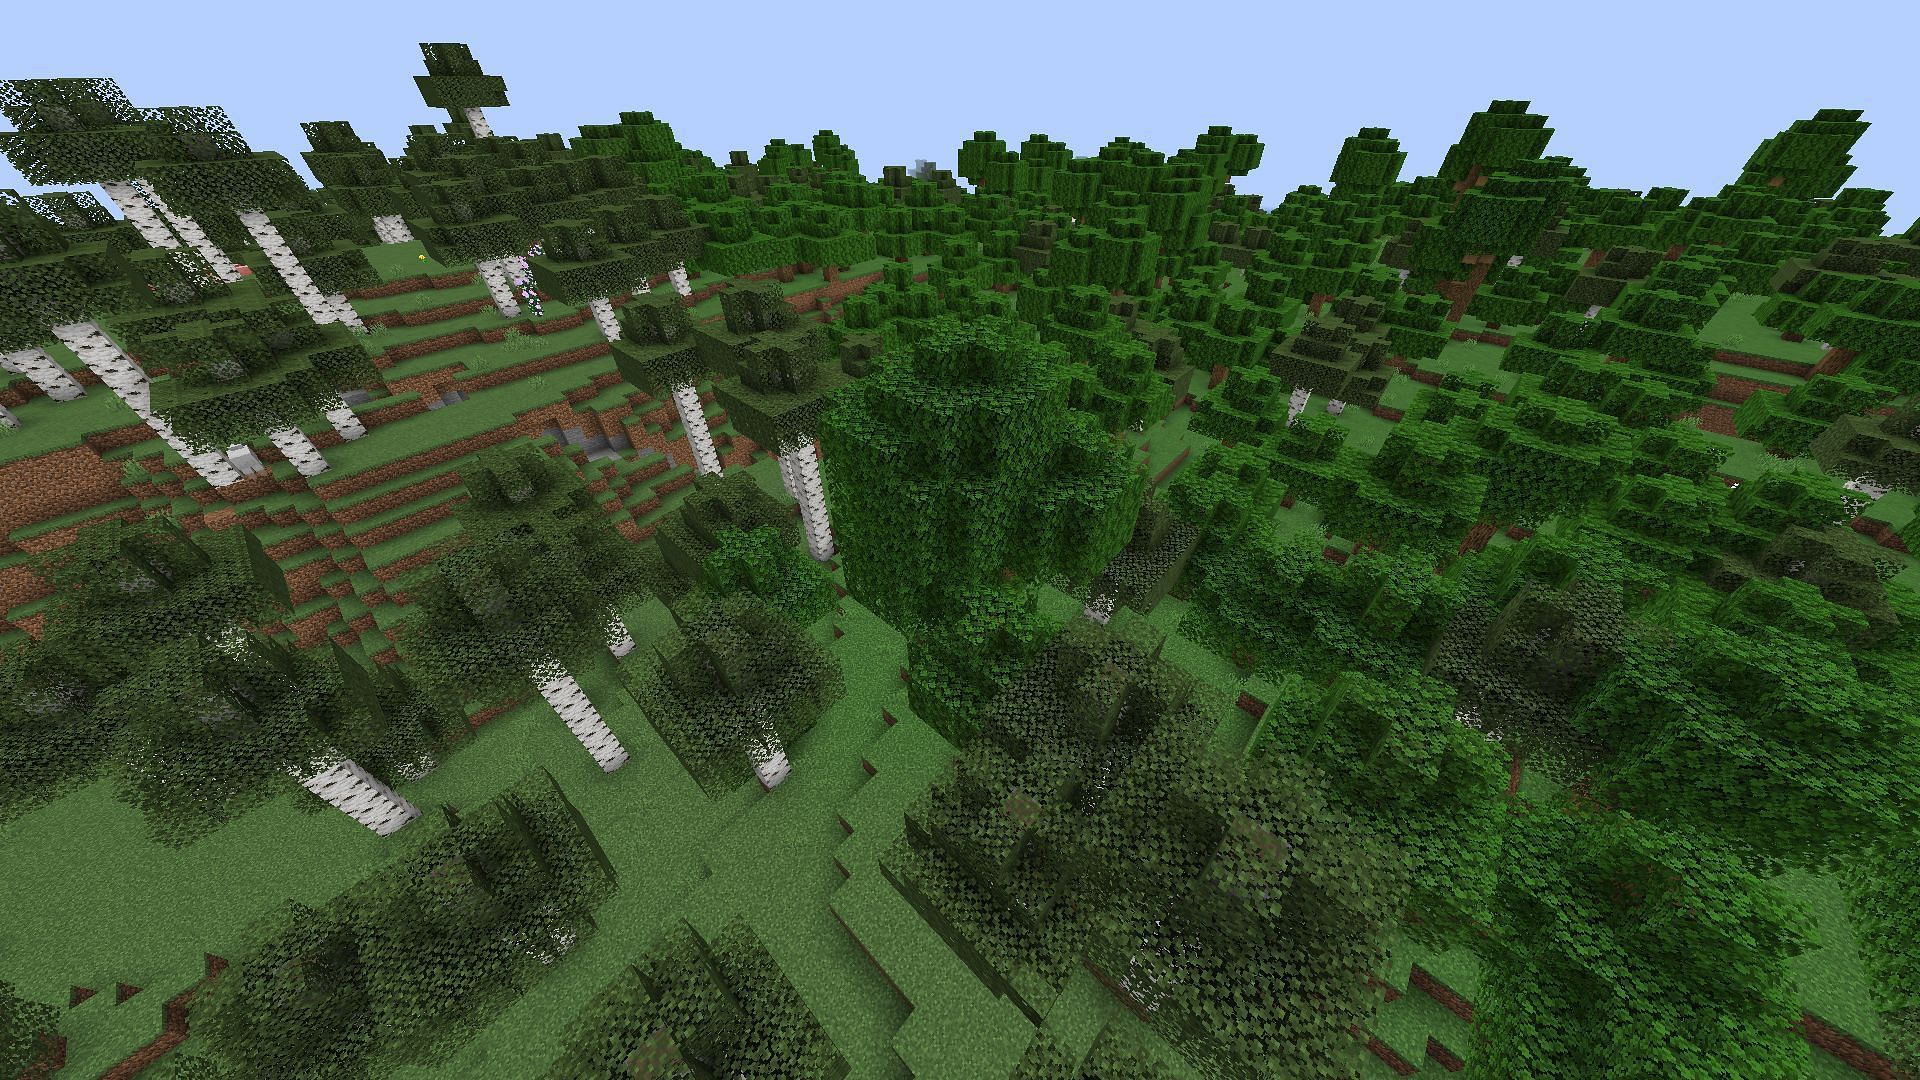 Freecam allows players to move the POV anywhere they want (Image via Mojang)